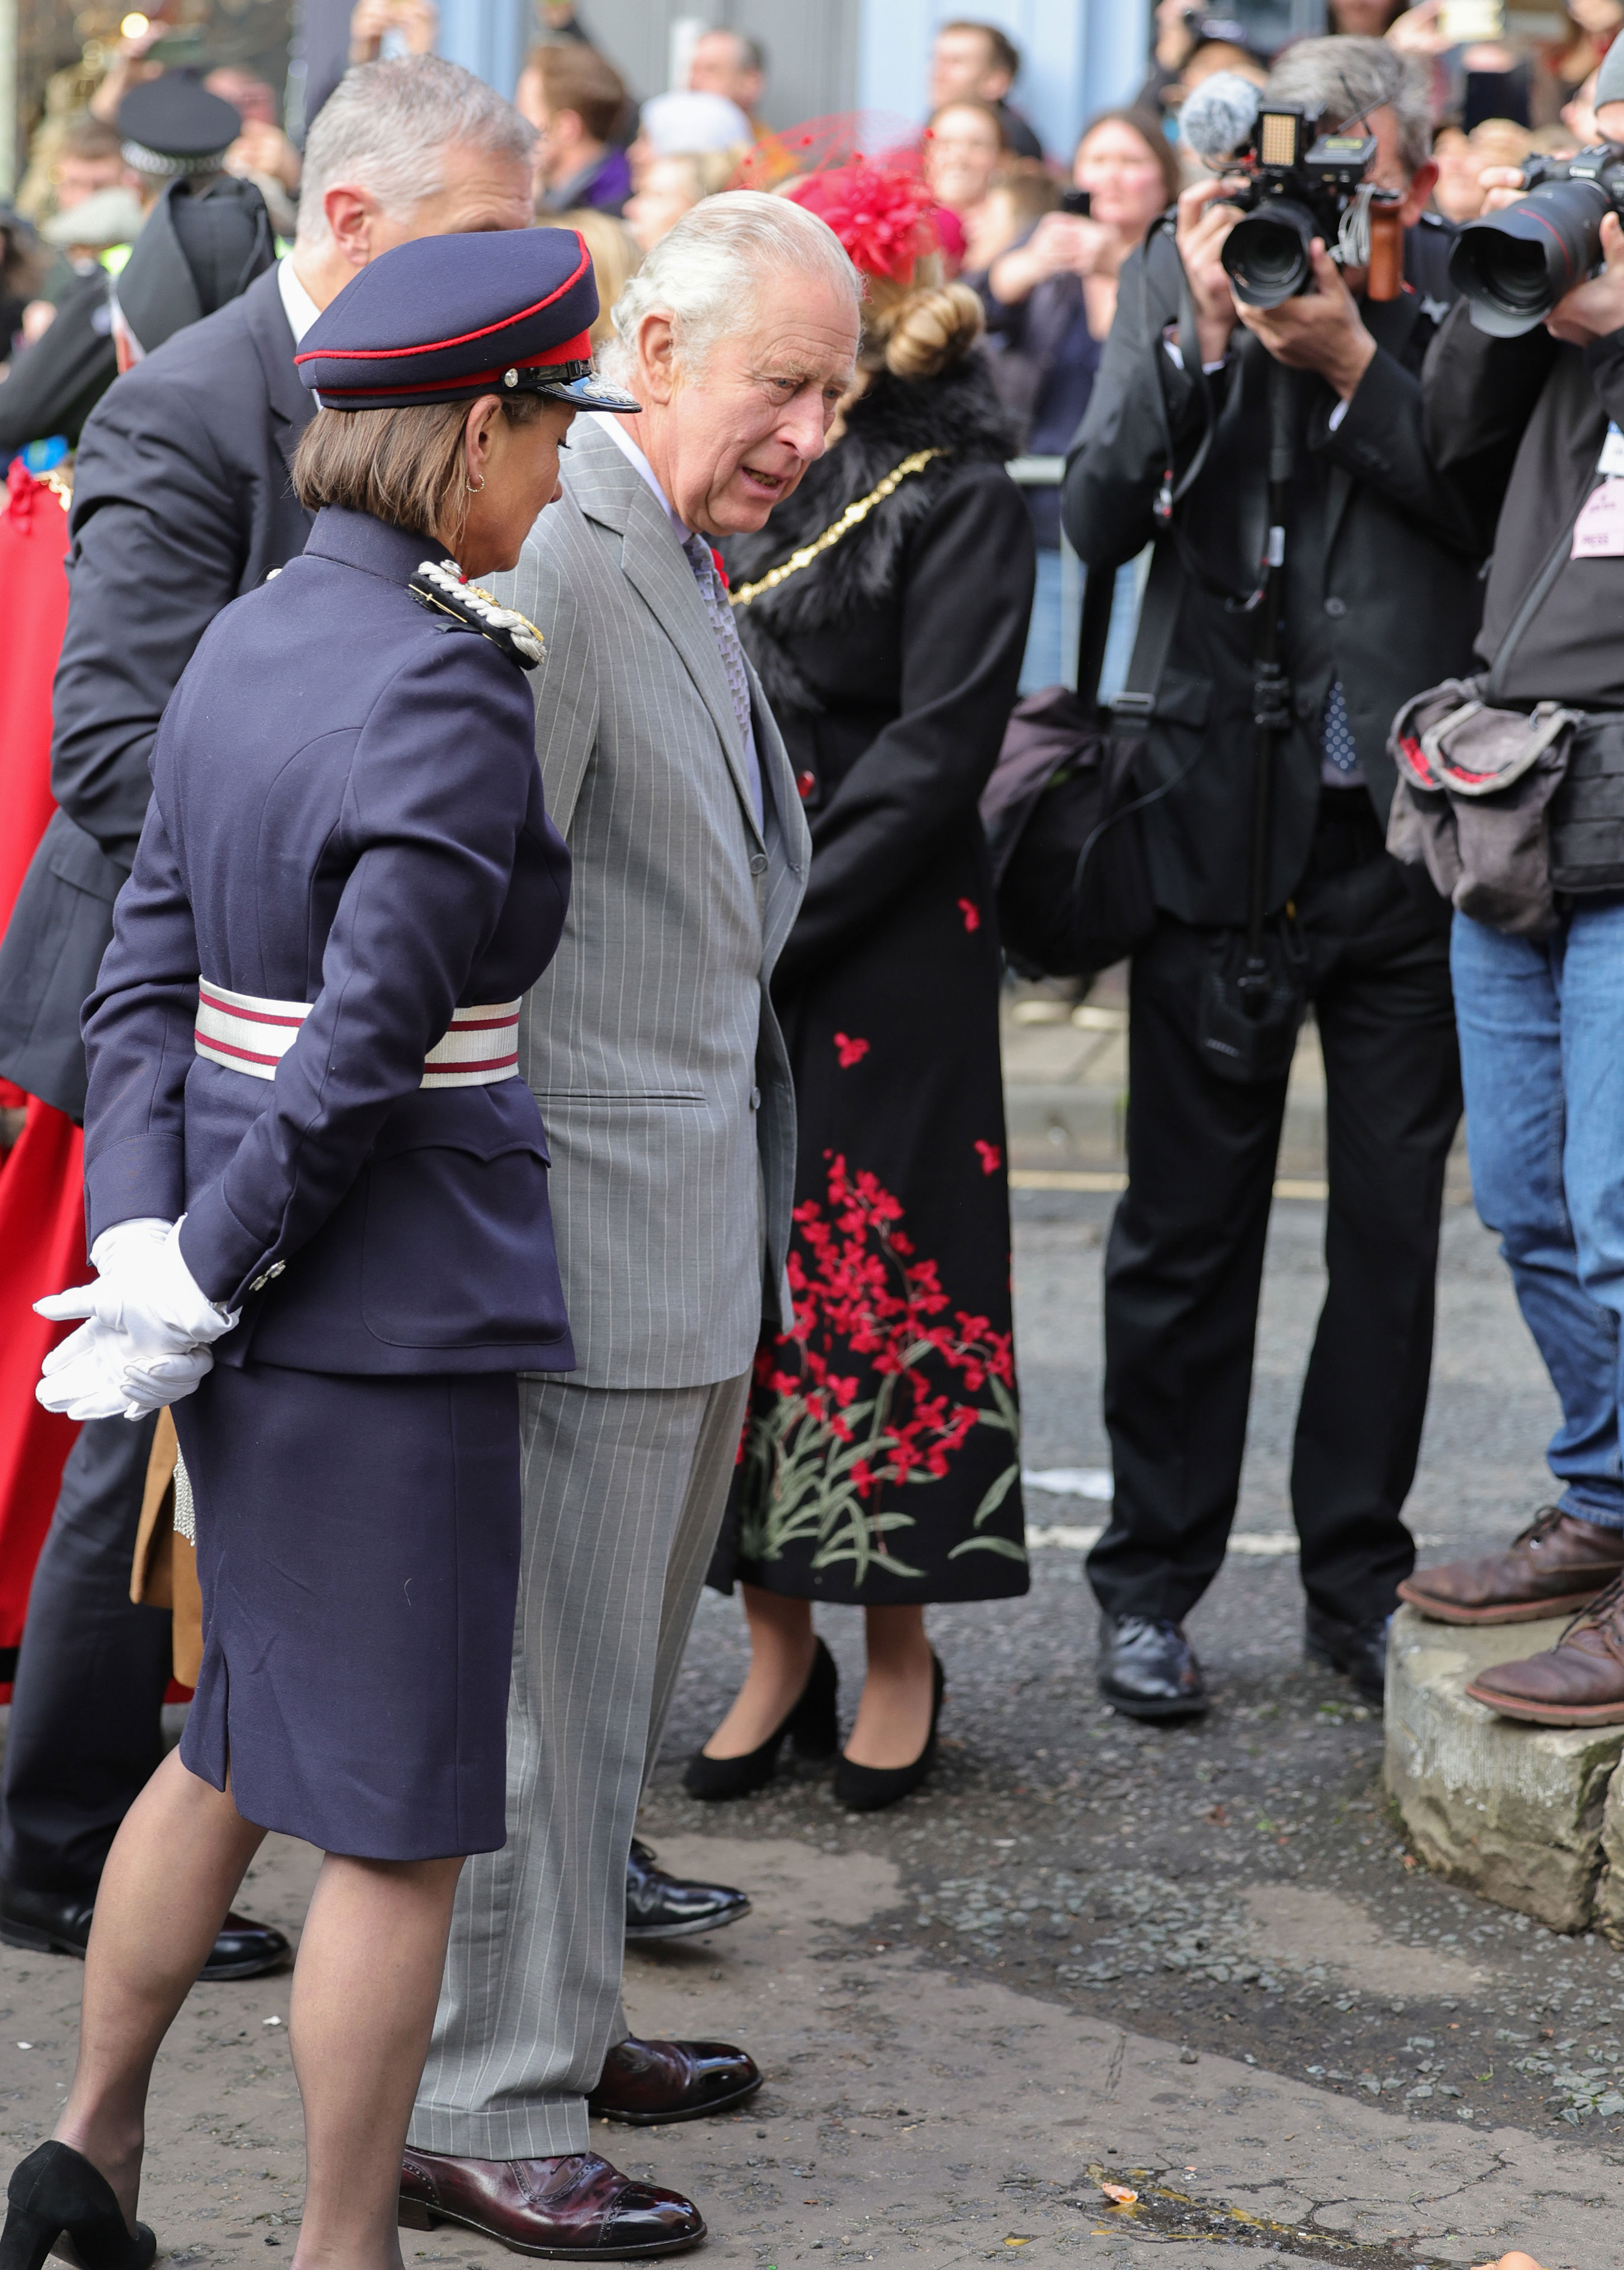 <p>A broken egg thrown by a member of the public at King Charles III is seen on the ground in front of the monarch as he and Queen Consort Camilla (not pictured) arrived for a welcoming ceremony to the city of York at Micklegate Bar during an official visit to Yorkshire, England, on Nov. 9, 2022. The person who threw the eggs narrowly missed the monarch, who carried on calmly.</p>